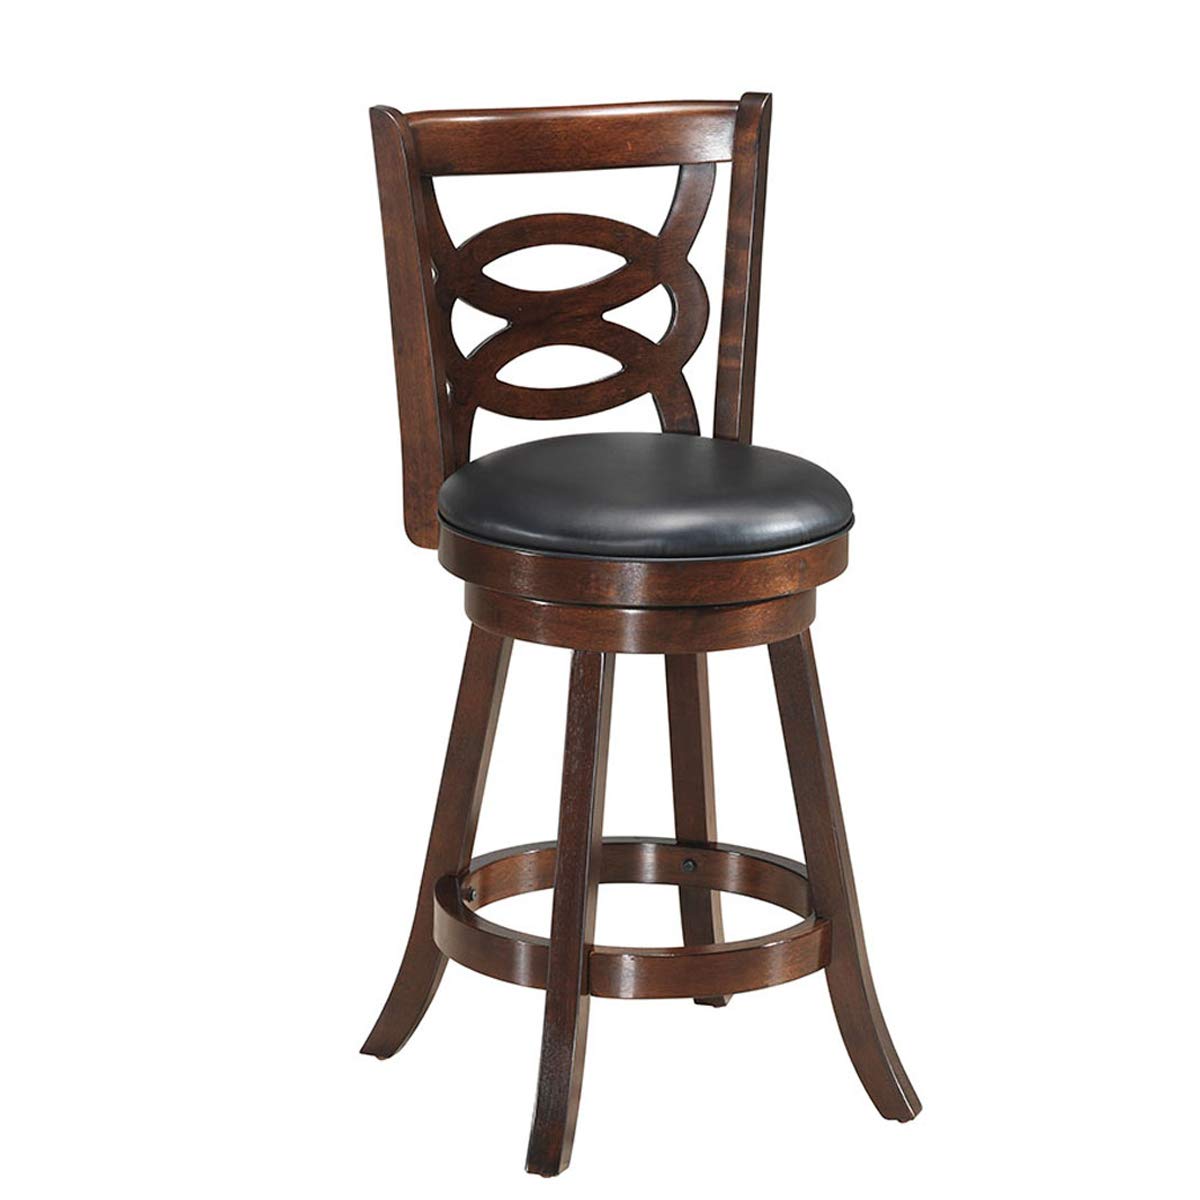 Giantex Bar Stools, Counter Height Dining Chair, Fabric Upholstered 360 Degree Swivel